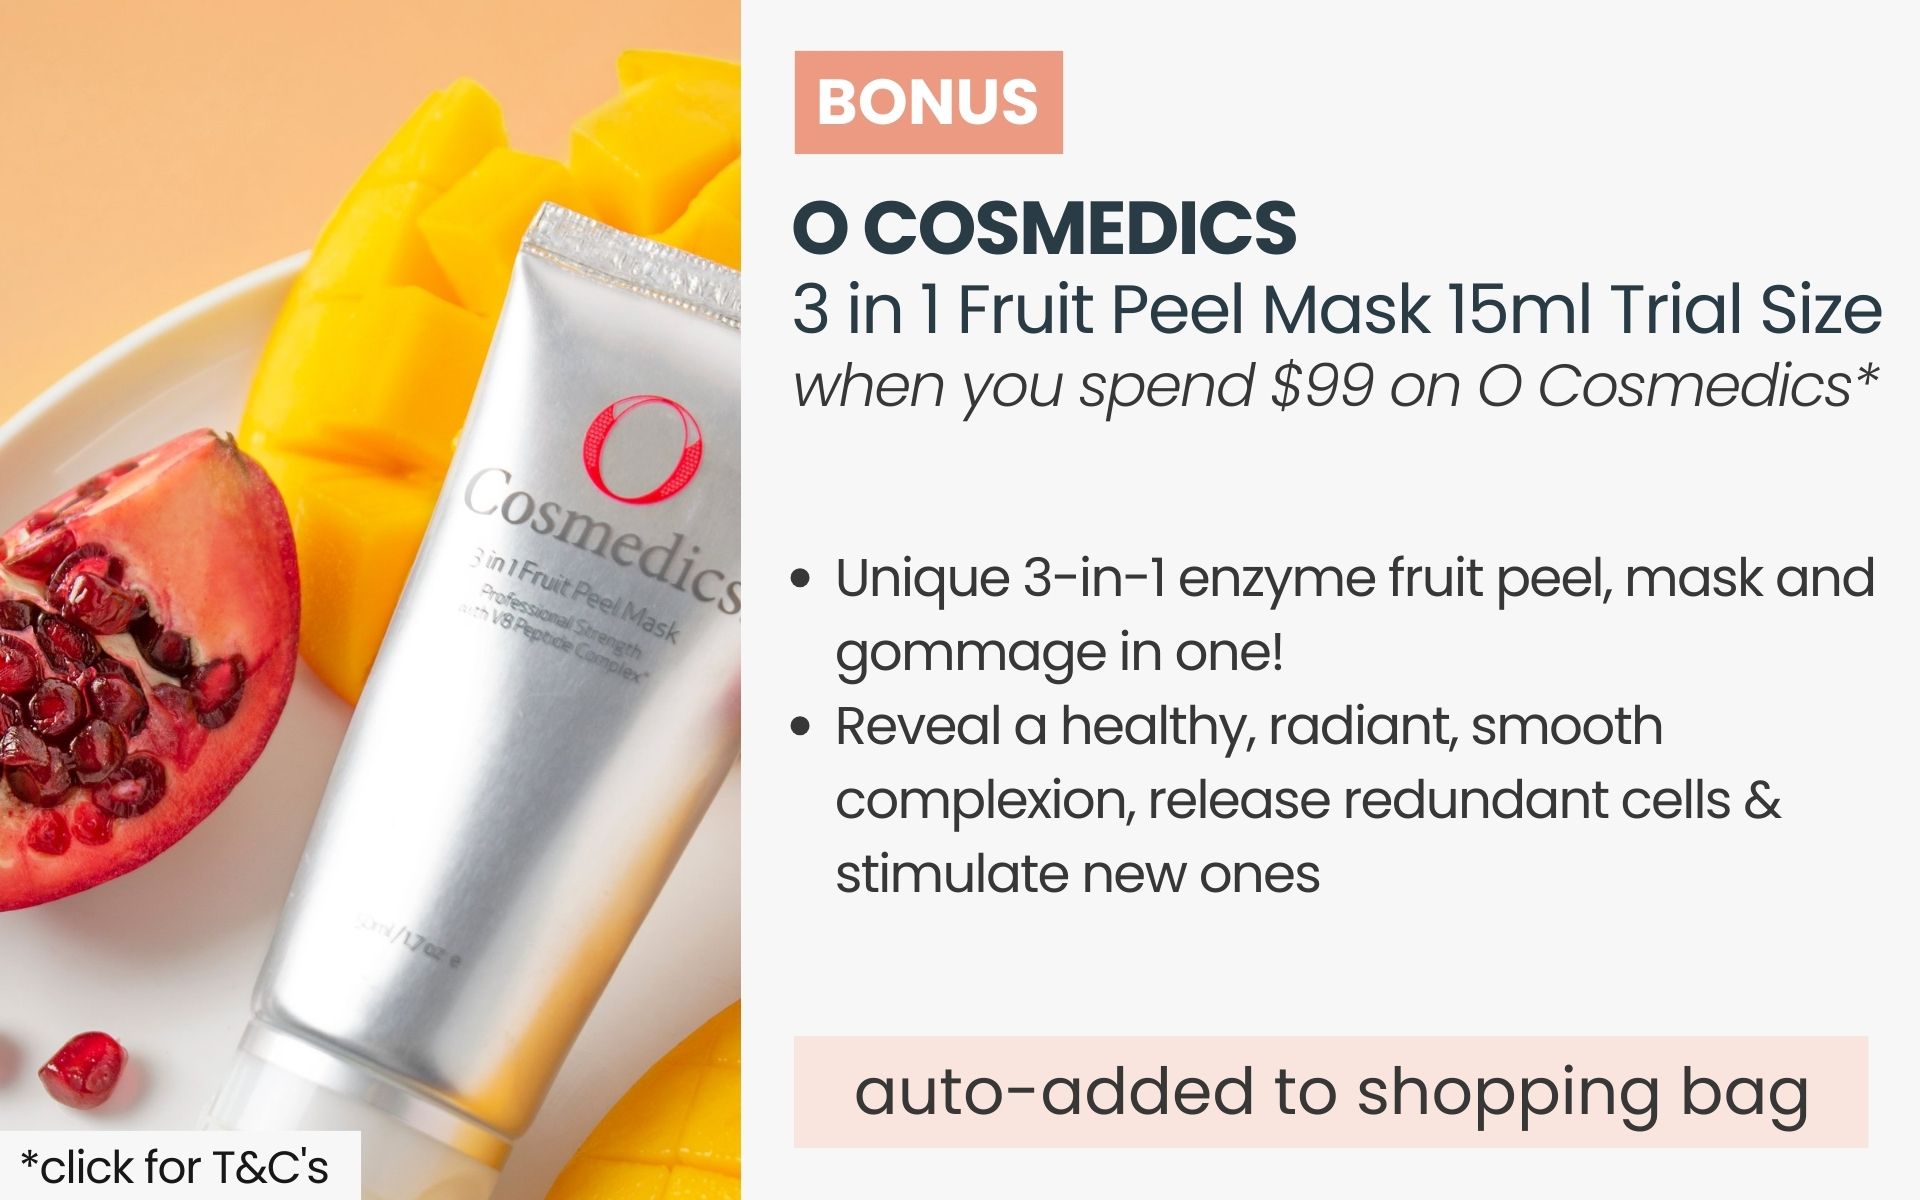 BONUS O Cosmedics 3 in 1 Fruit Peel Mask 15ml Trial Size. Automatically added to your shopping bag when you spend $99 on O Cosmedics products.